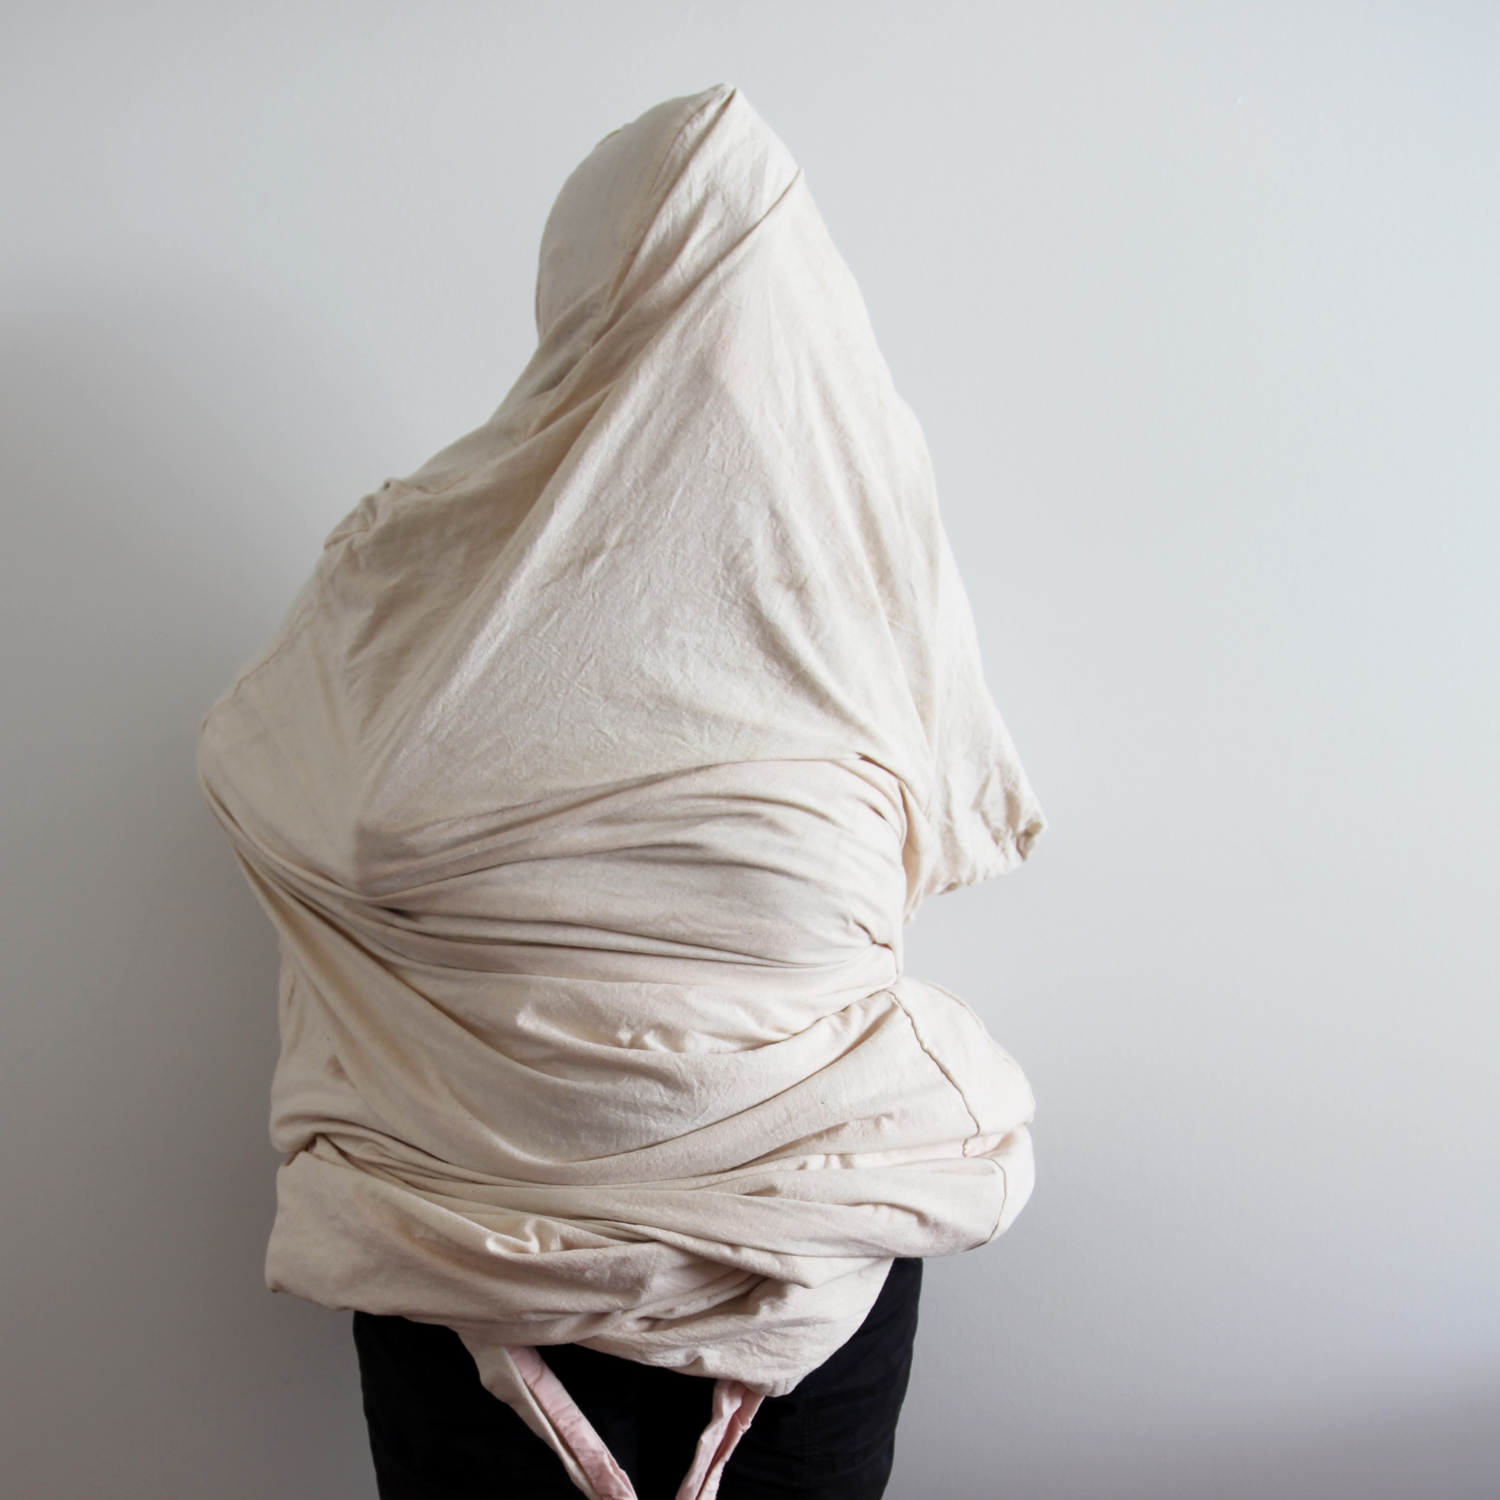 Person with their head and body enclosed in cloth bag.